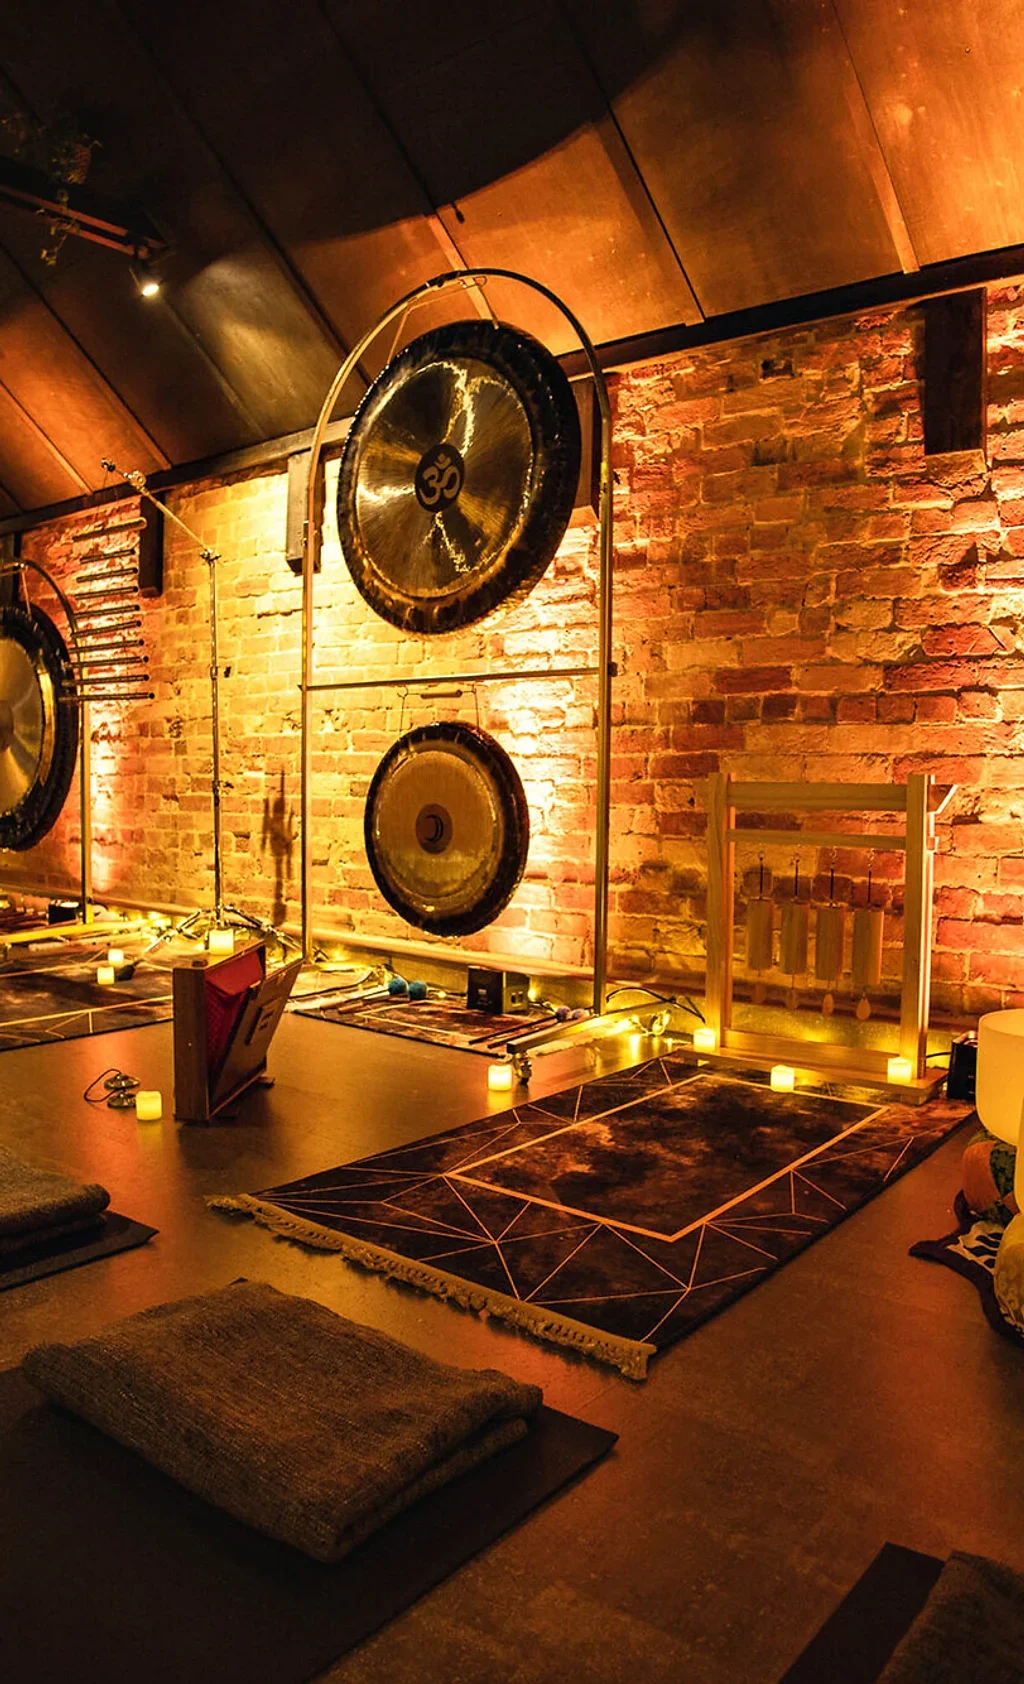 Private group sound journey & gong bath at my beautiful venue in Bournemouth.